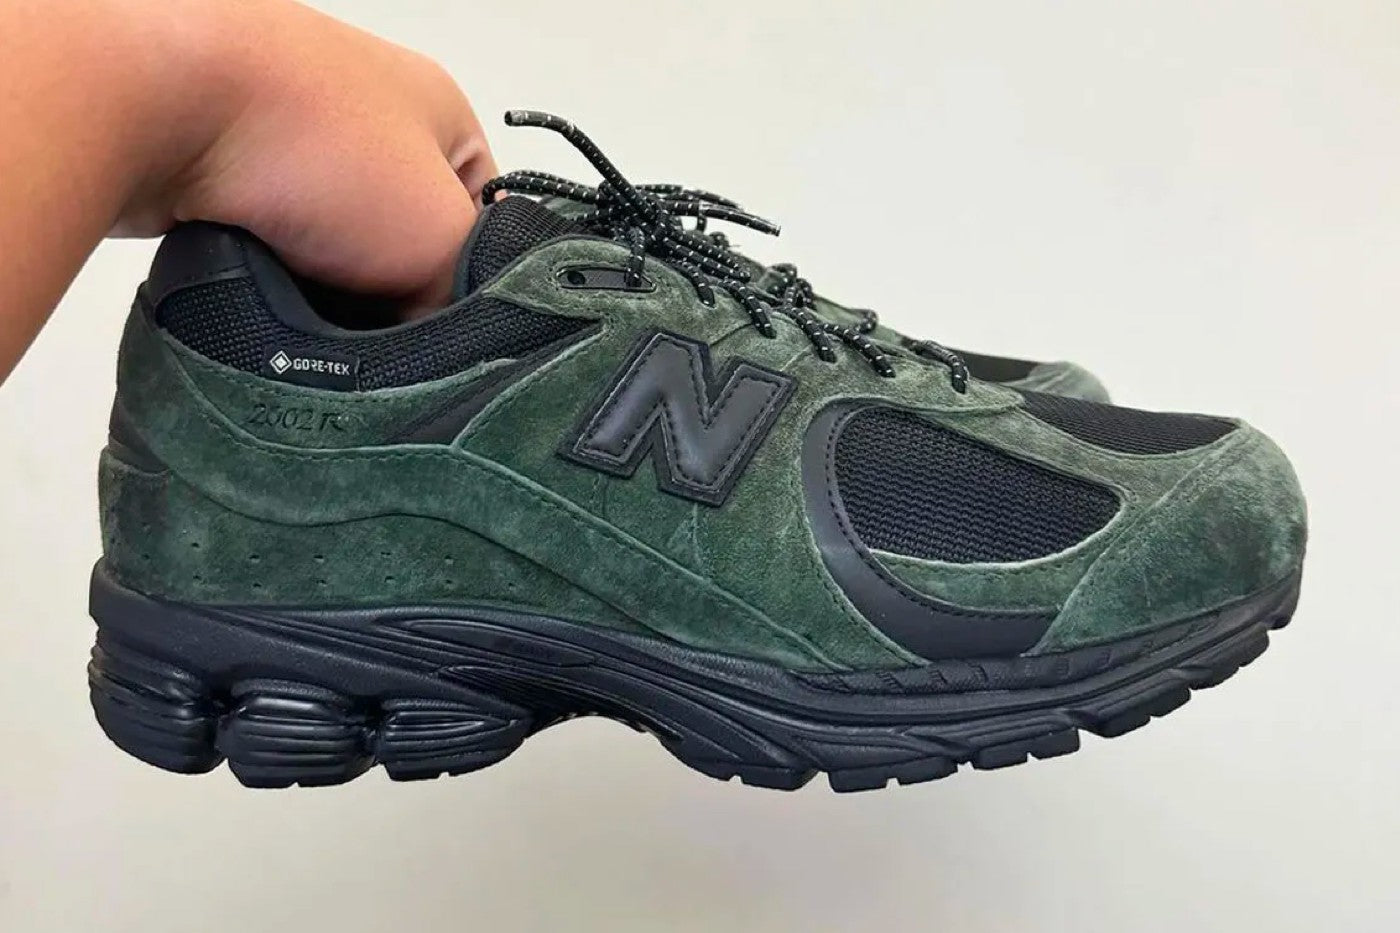 The JJJJound x New Balance 2002R “Green” Gets Covered in Gore